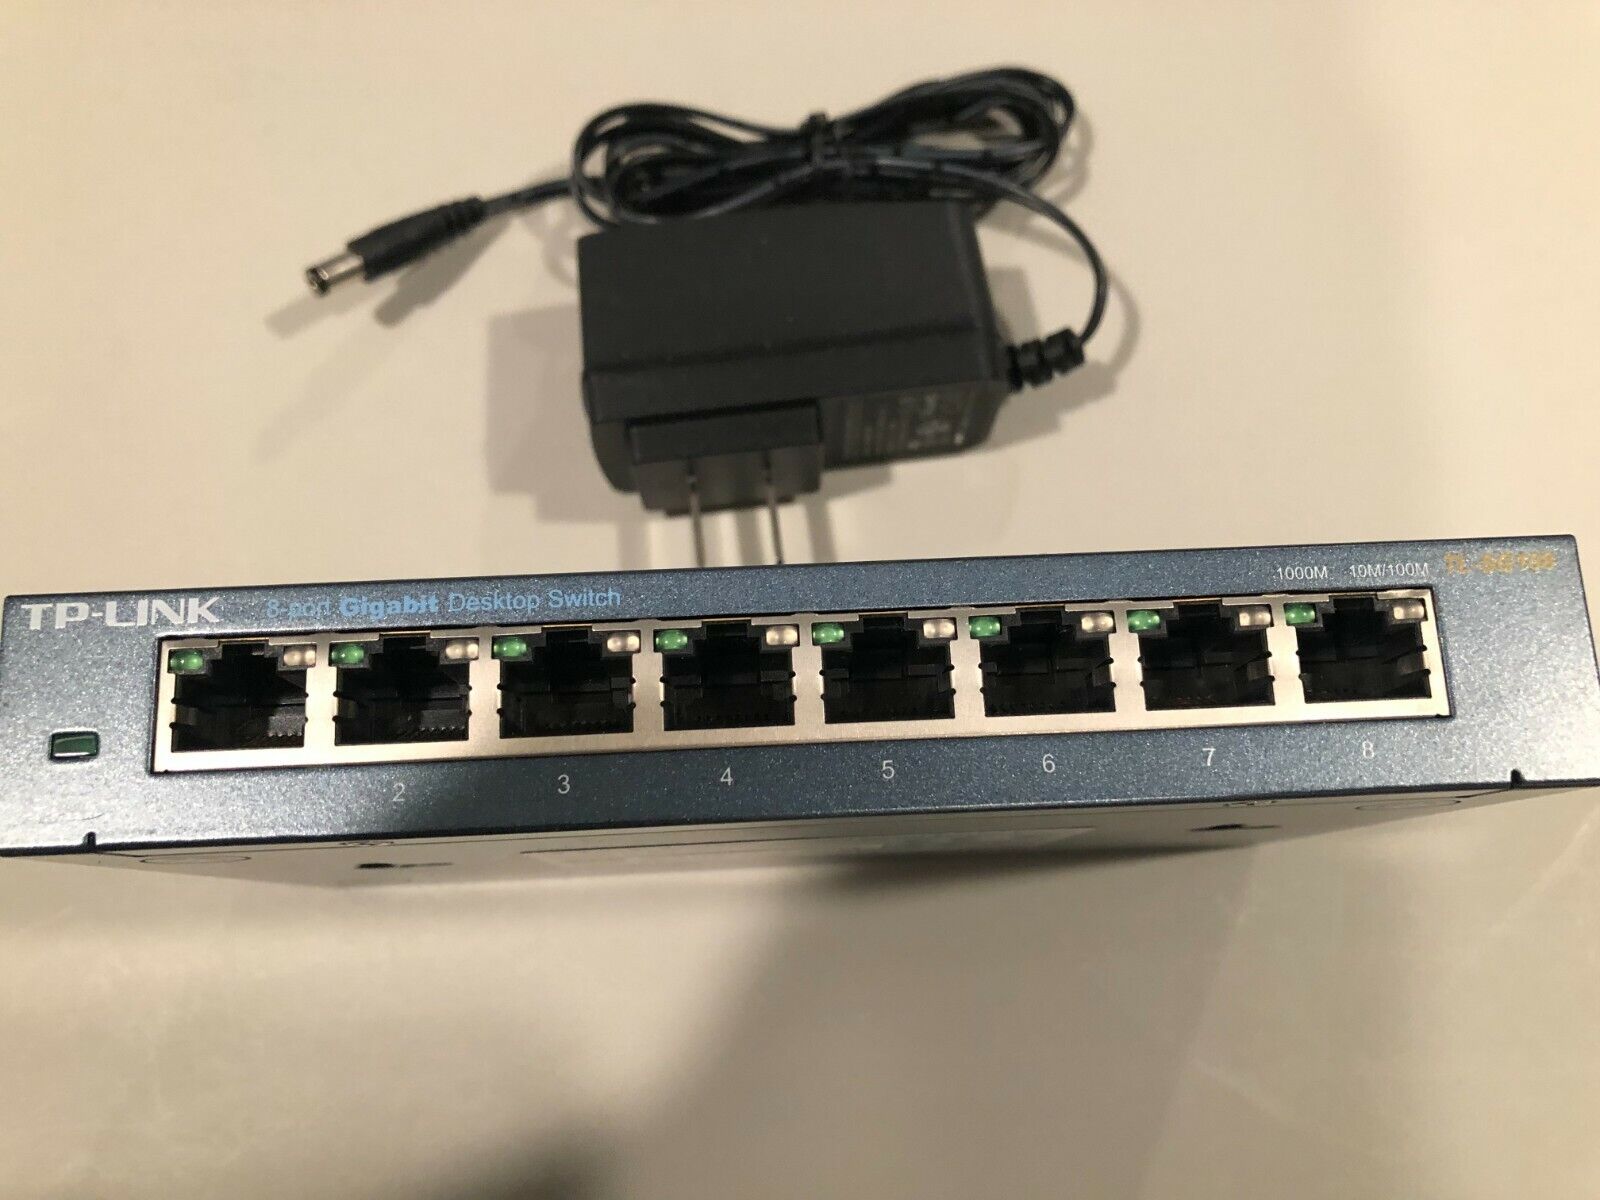 TP-LINK TL-SG108 8-Port Switch 10/100/1000Mbps Switch - works great